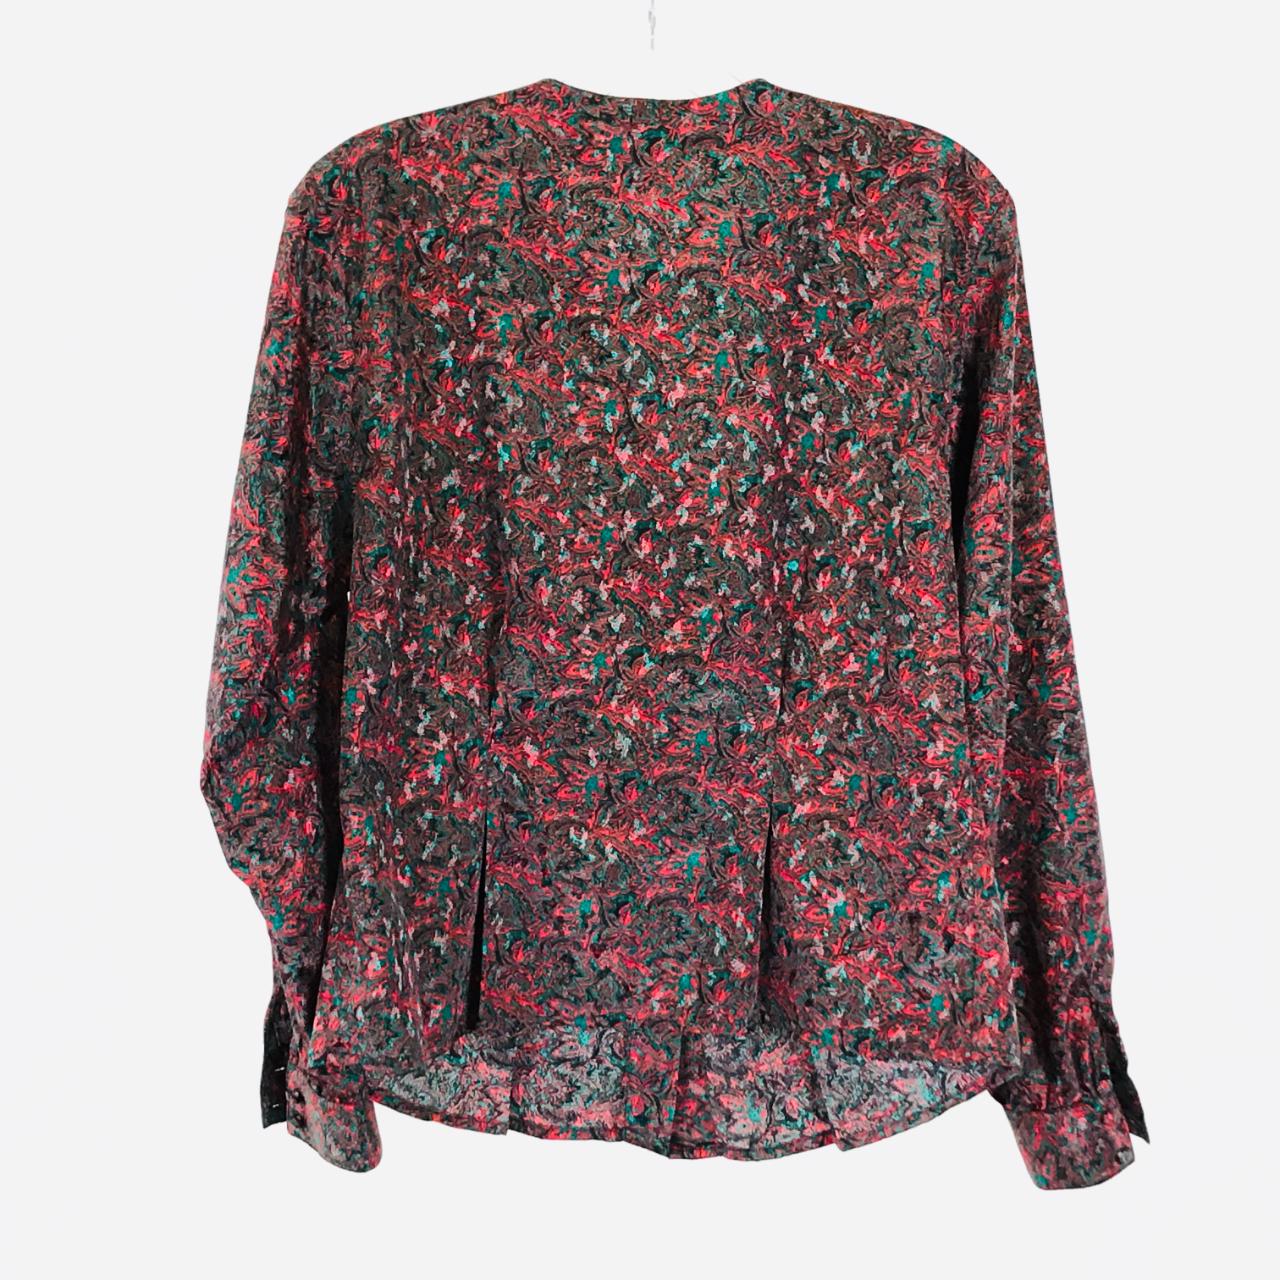 Women's Red and Green Blouse (2)